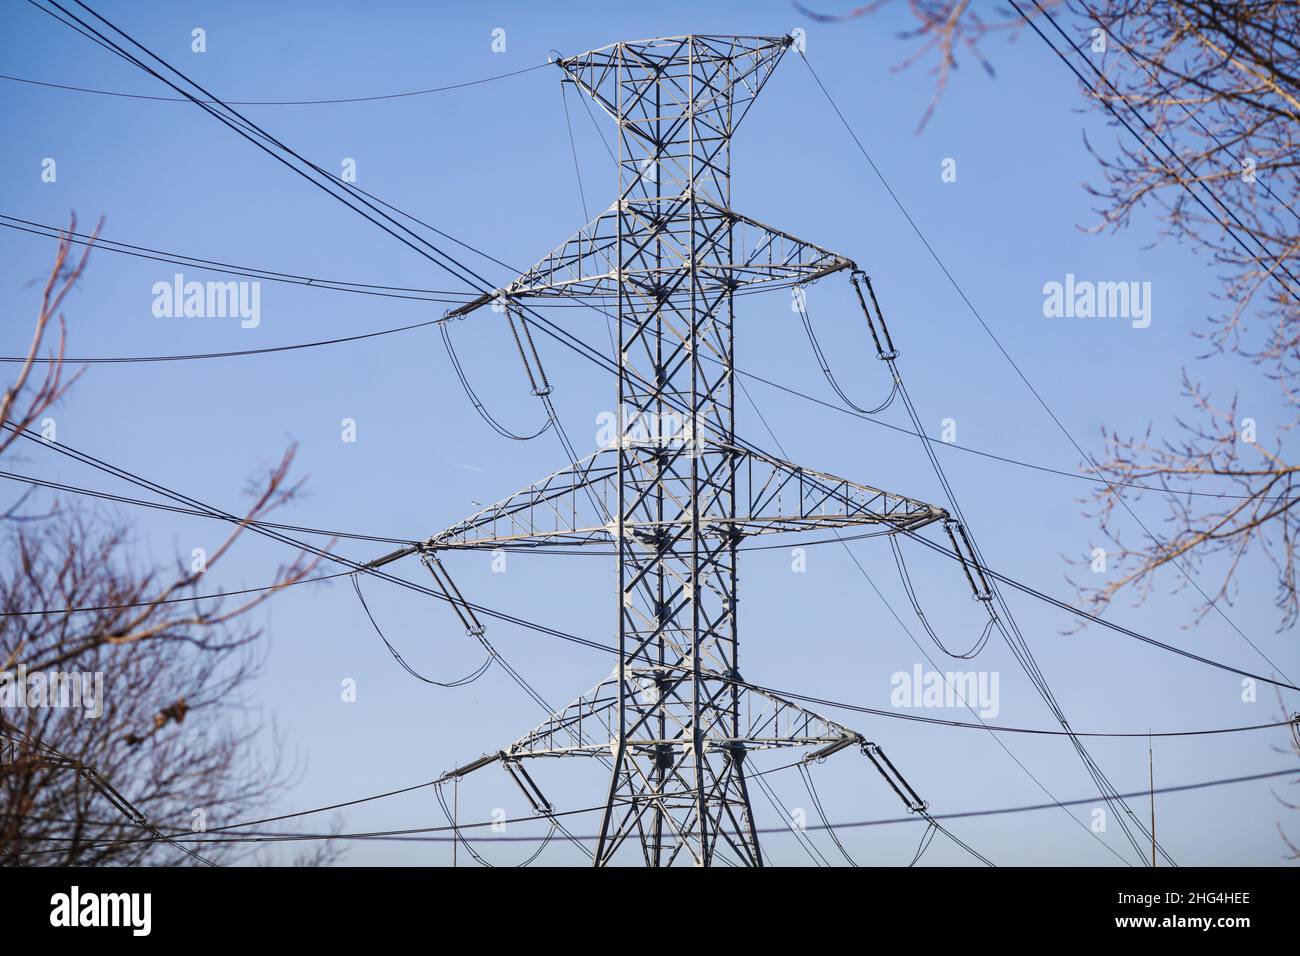 High voltage transmission lines on metallic poles in Bucharest, Romania. Stock Photo